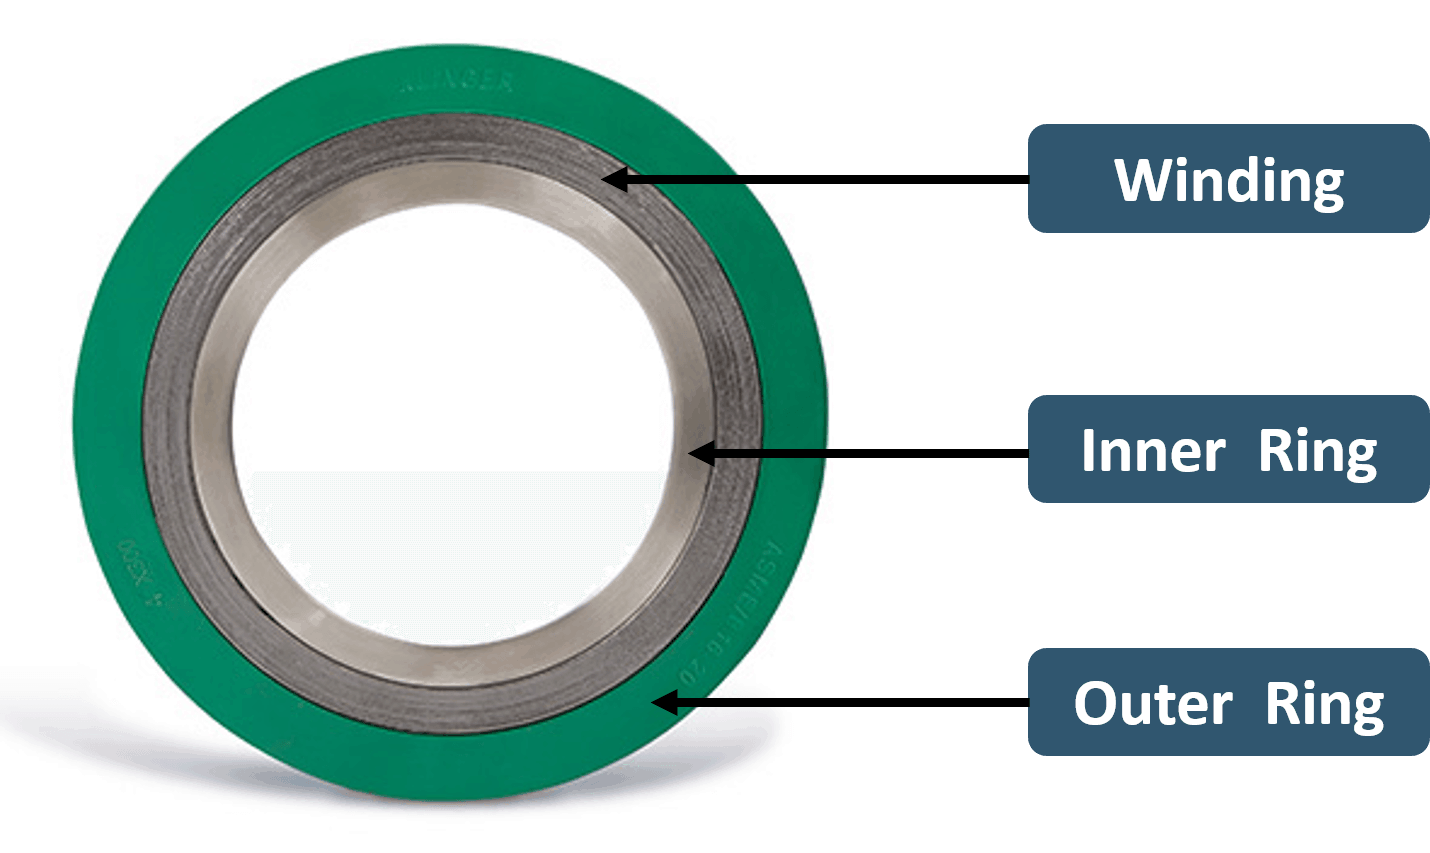 Spiral Wound Gaskets (Carbon Steel Outer) 150, 300 & 600 - Corseal